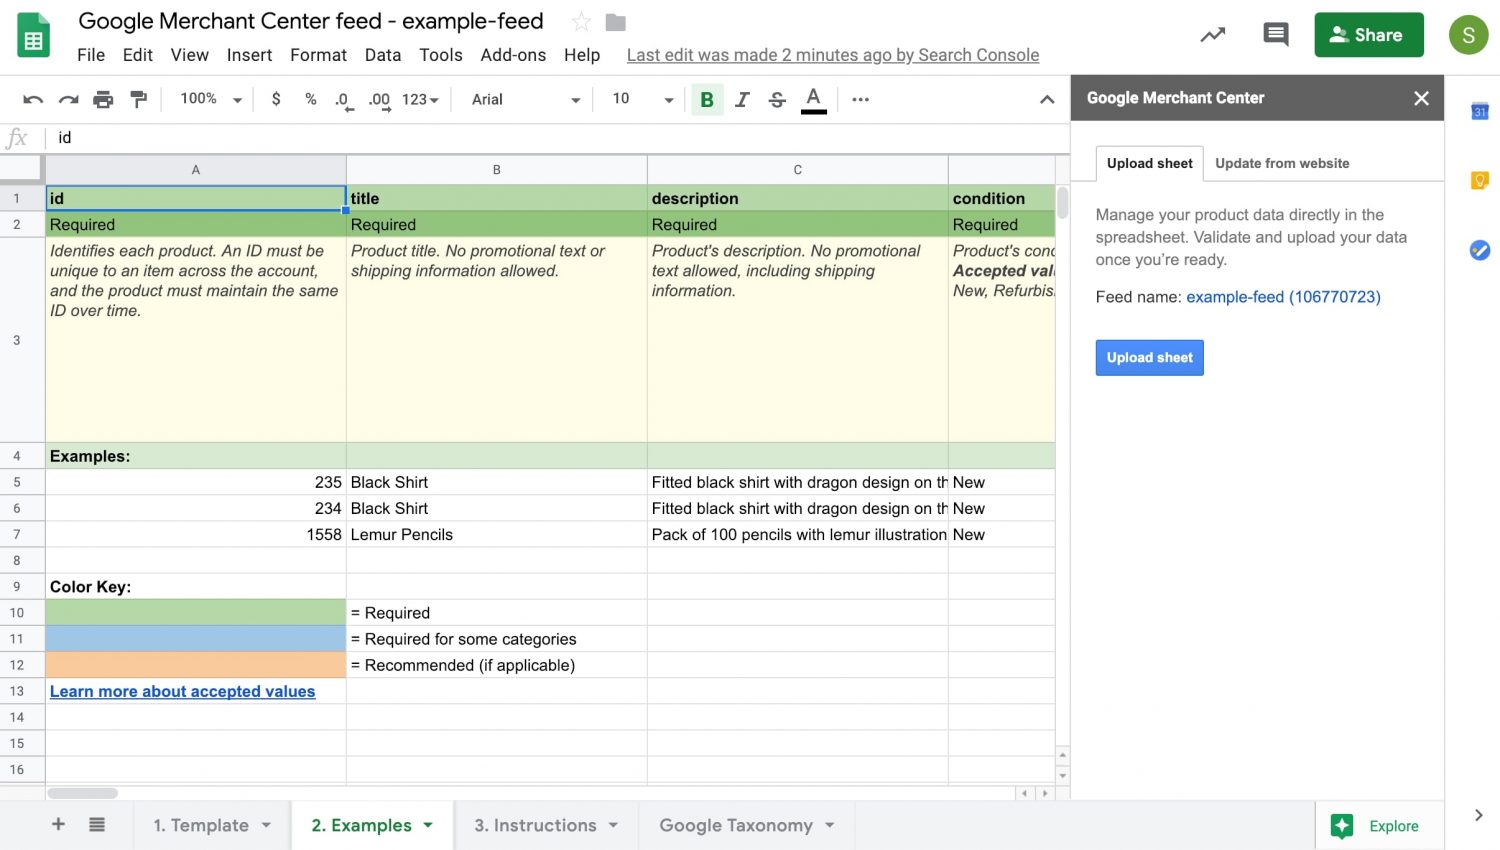 One way to generate a product feed is via Google Sheets.